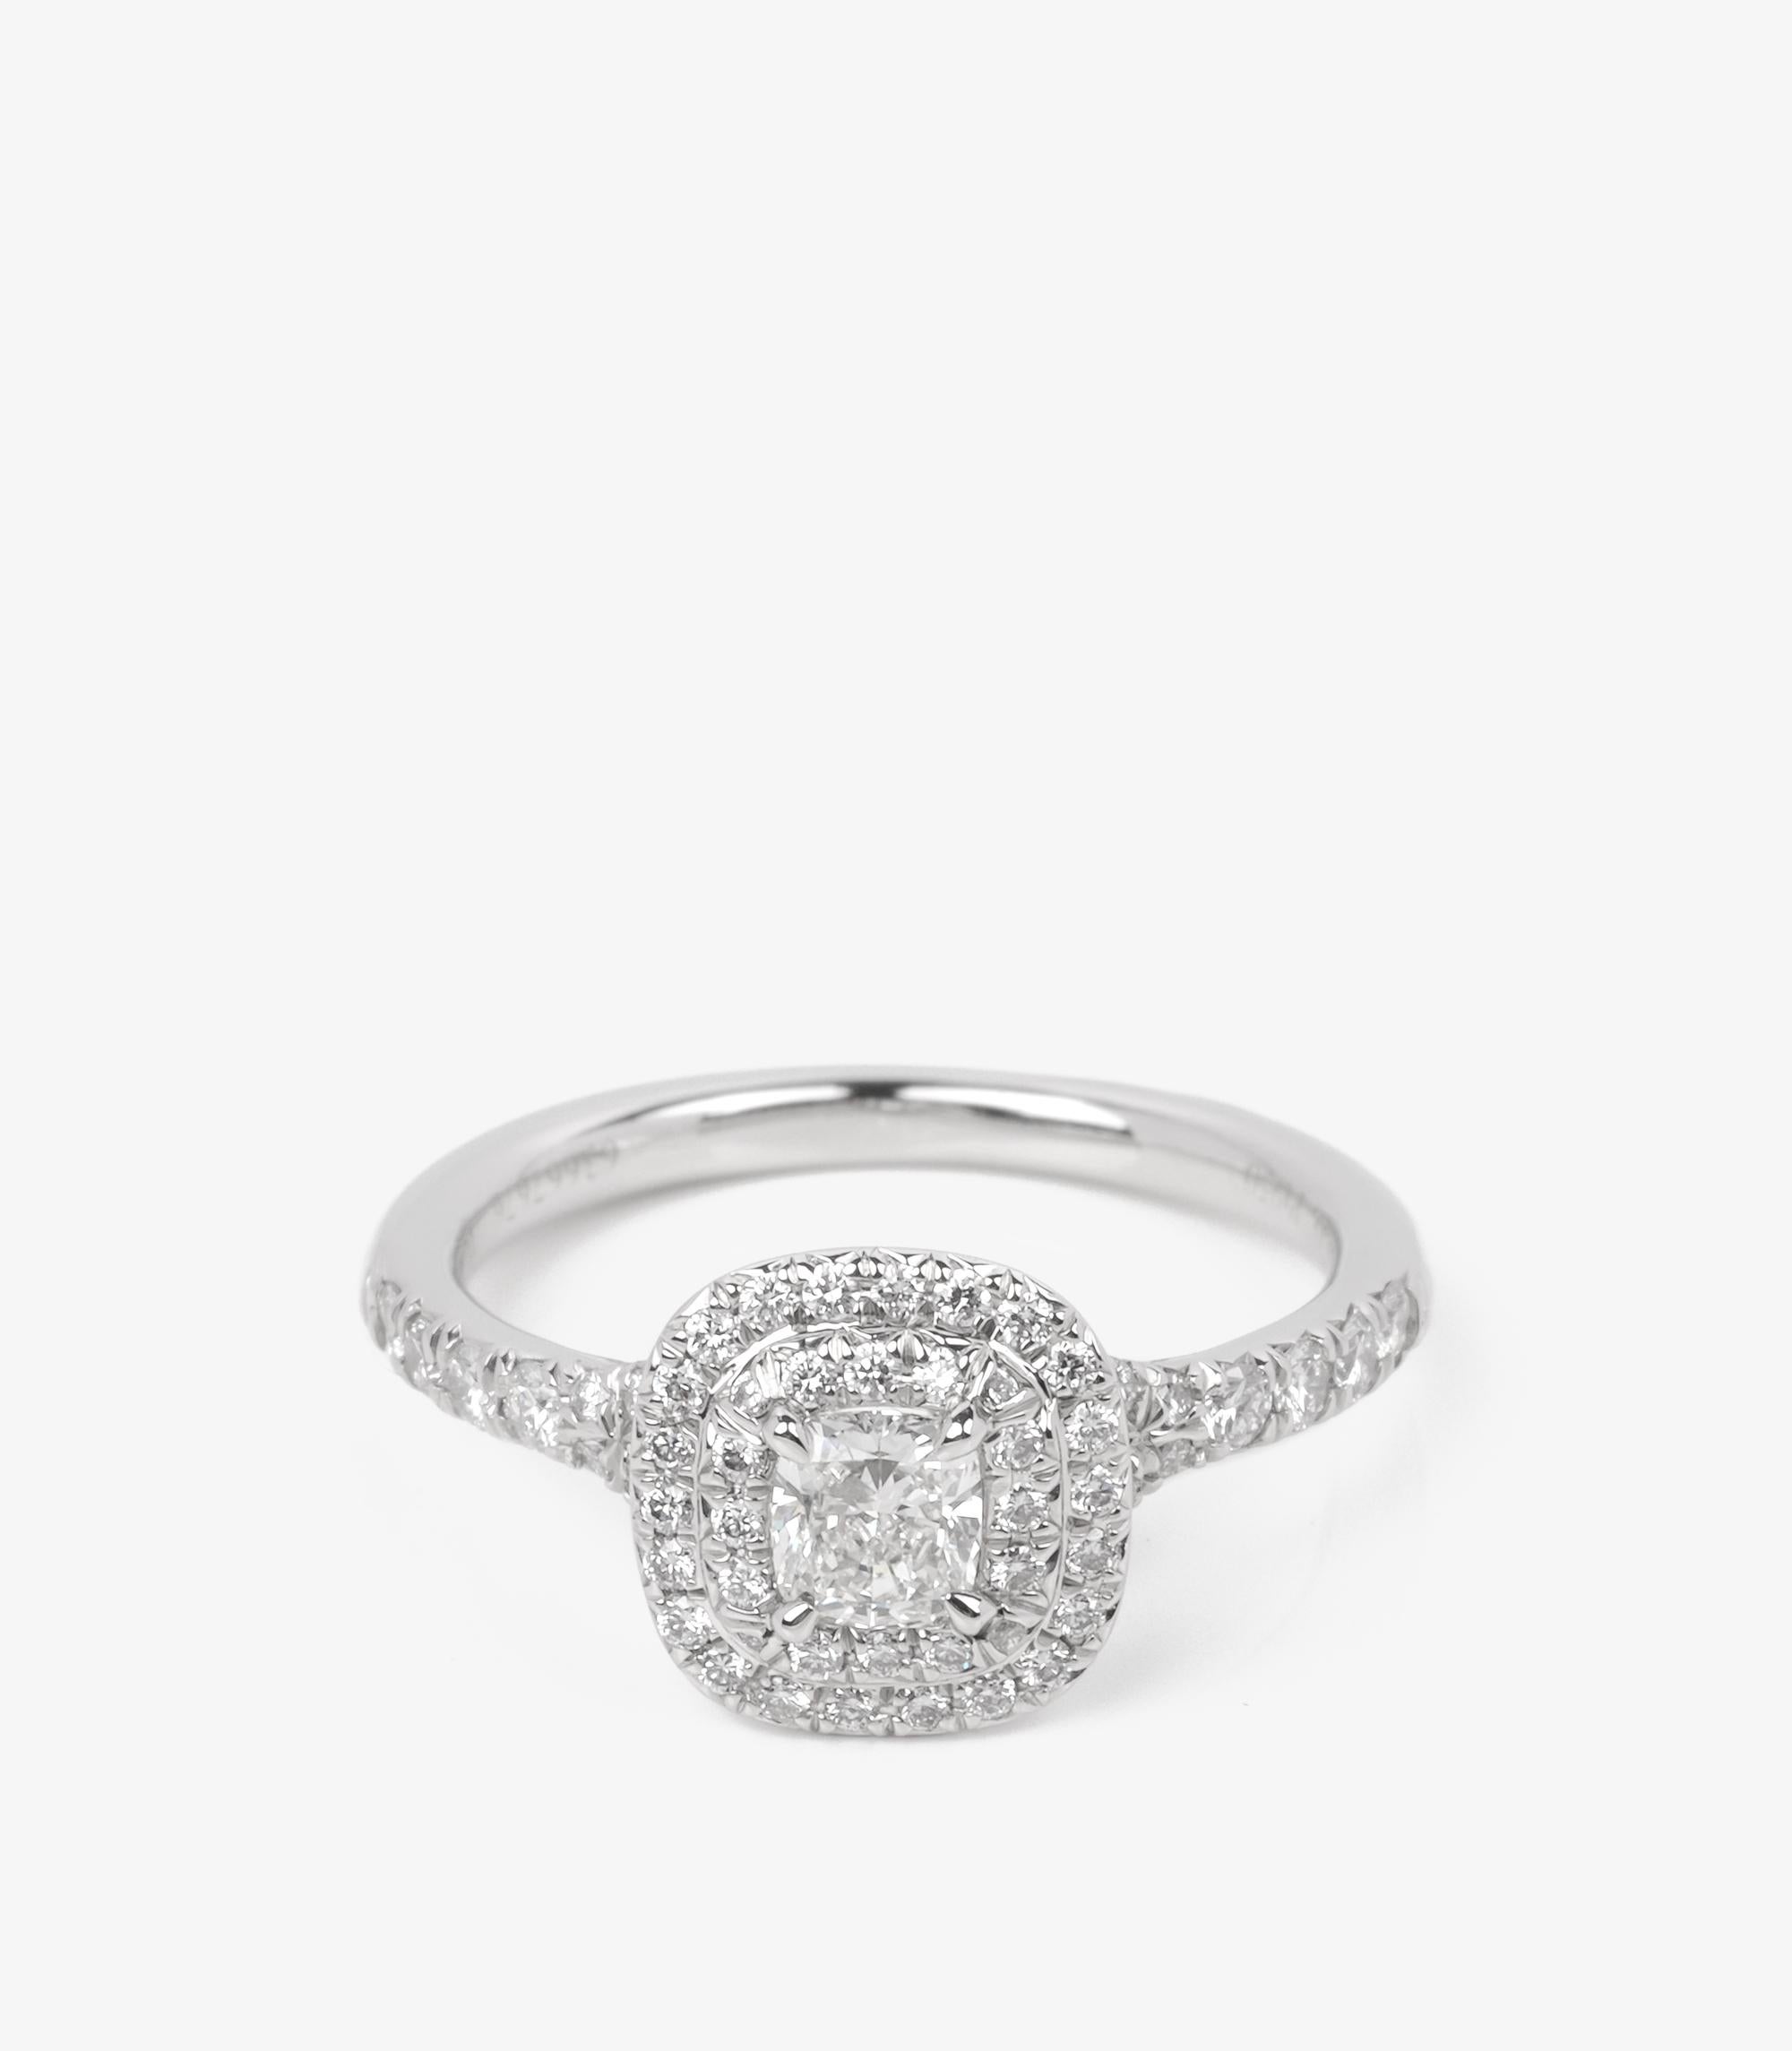 Tiffany & Co. 0.24ct Cushion Cut Diamond Platinum Soleste Ring In Excellent Condition For Sale In Bishop's Stortford, Hertfordshire